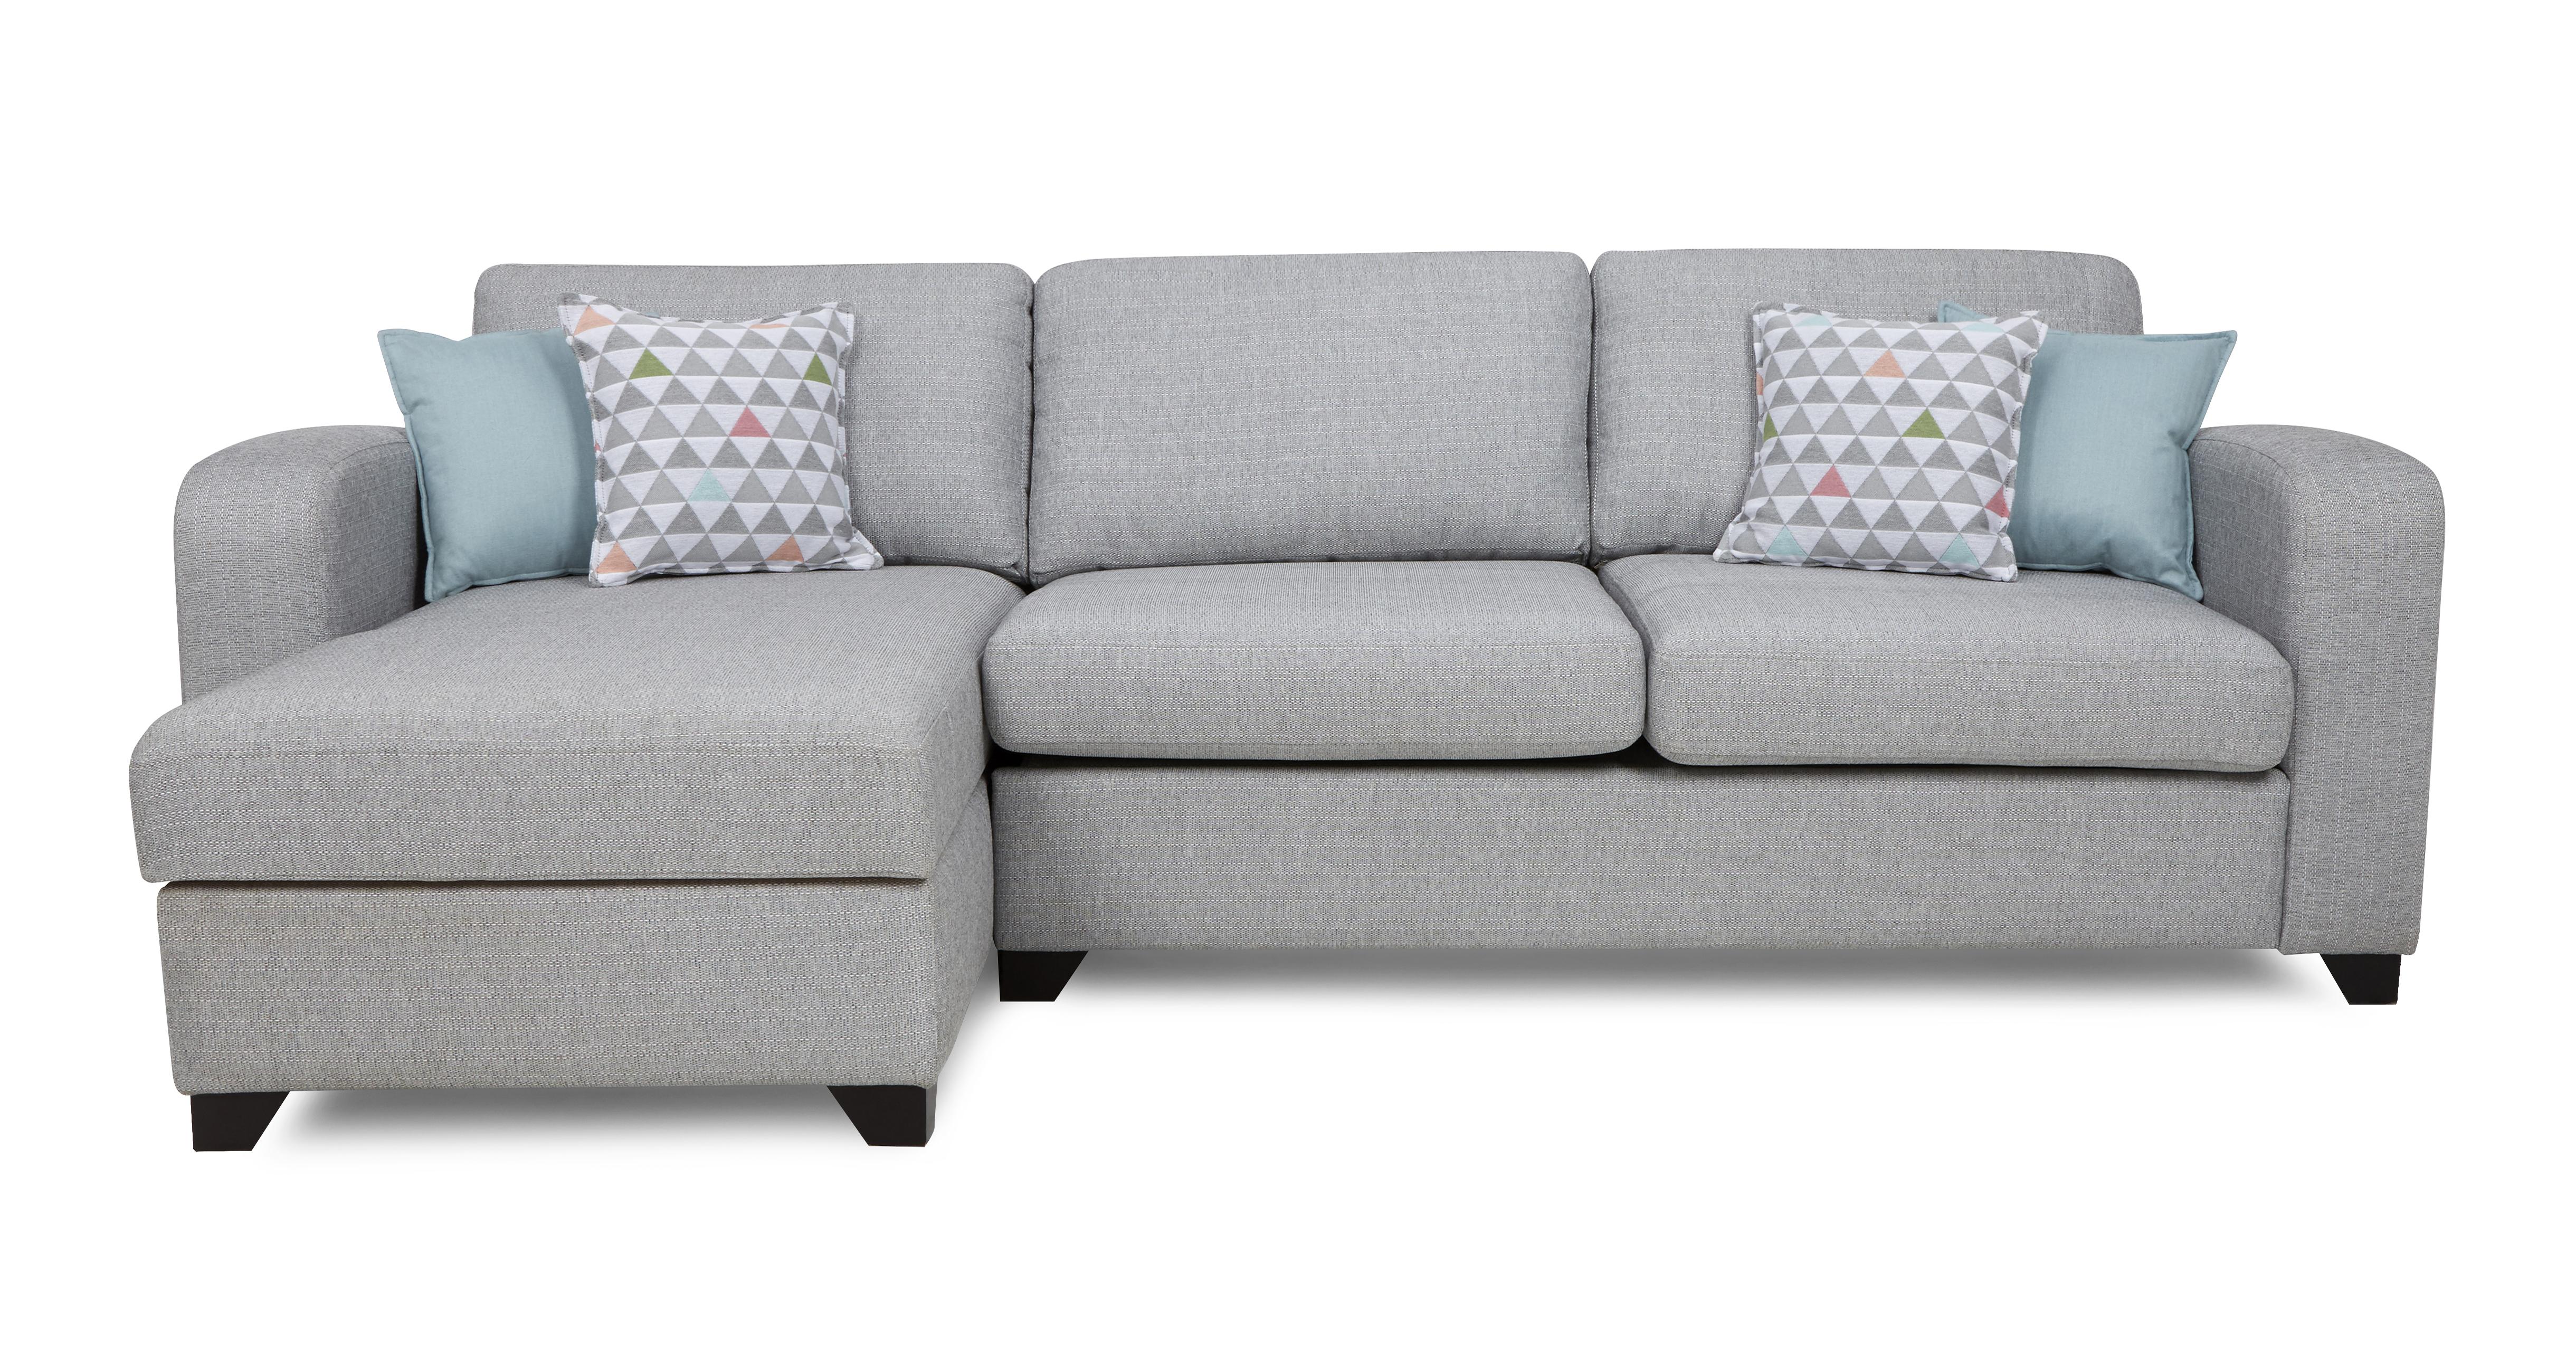 Lydia Left Hand Facing Chaise End 3 Seater Sofa DFS